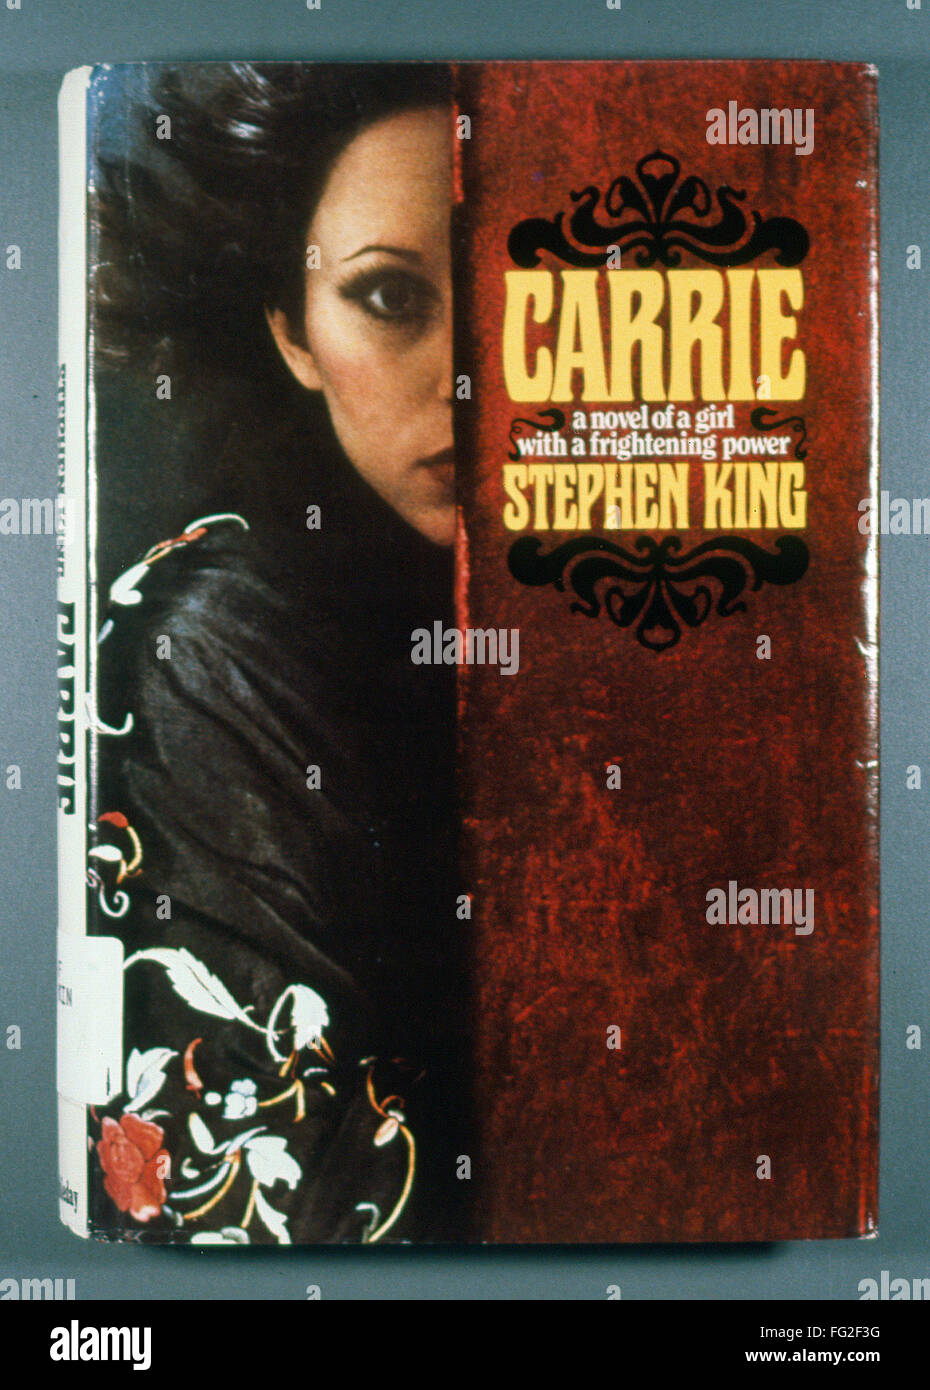 KING: CARRIE, 1974. /nFirst edition of 'Carrie' by Stephen King, 1974. Stock Photo